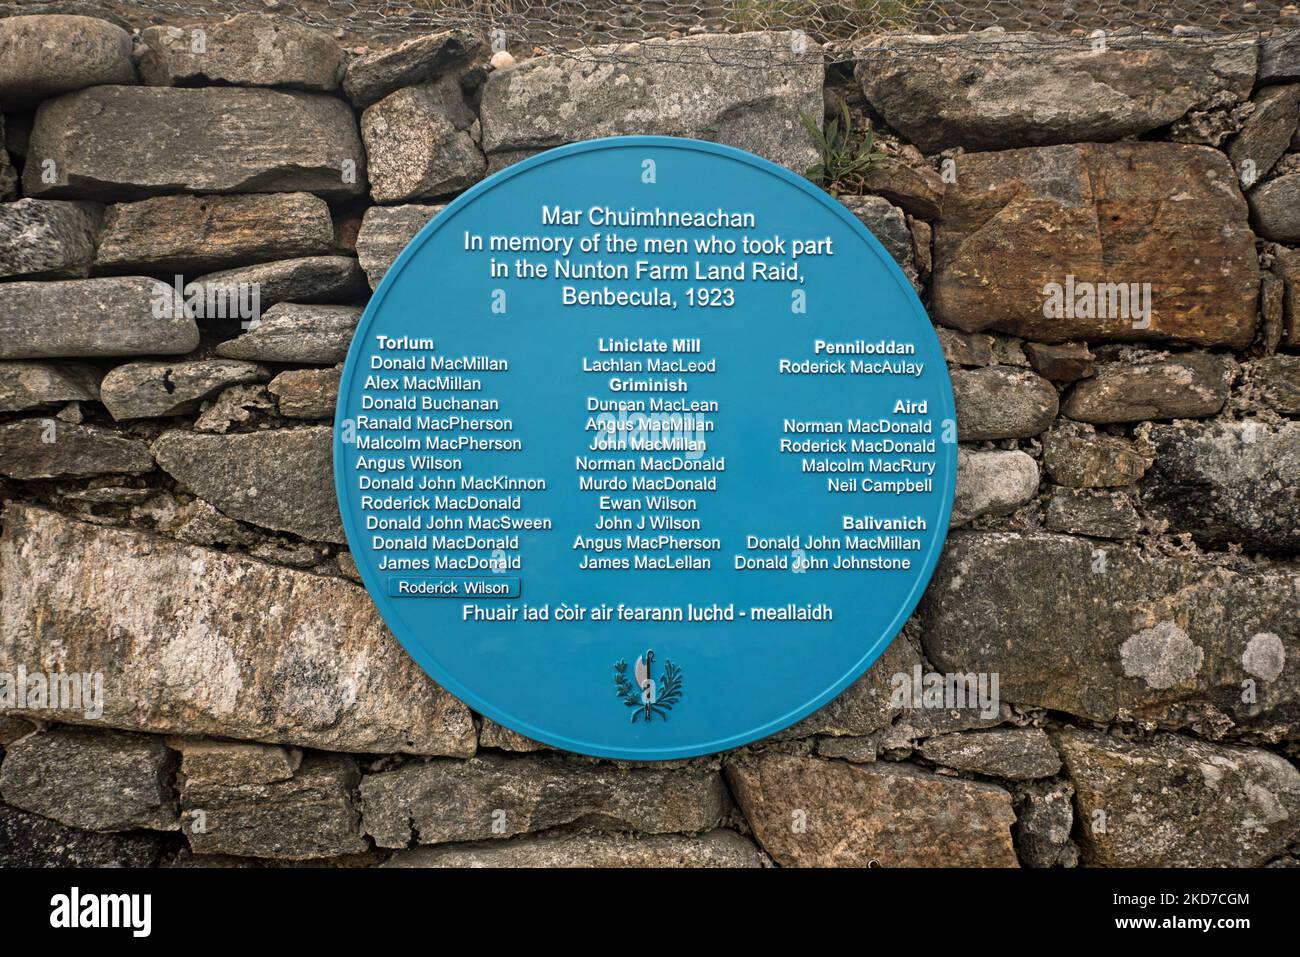 Plaque at the South Uist Distillery commemorating the men who took part in the Nunton Farm Land Raid on Benbecula in 1923. Stock Photo